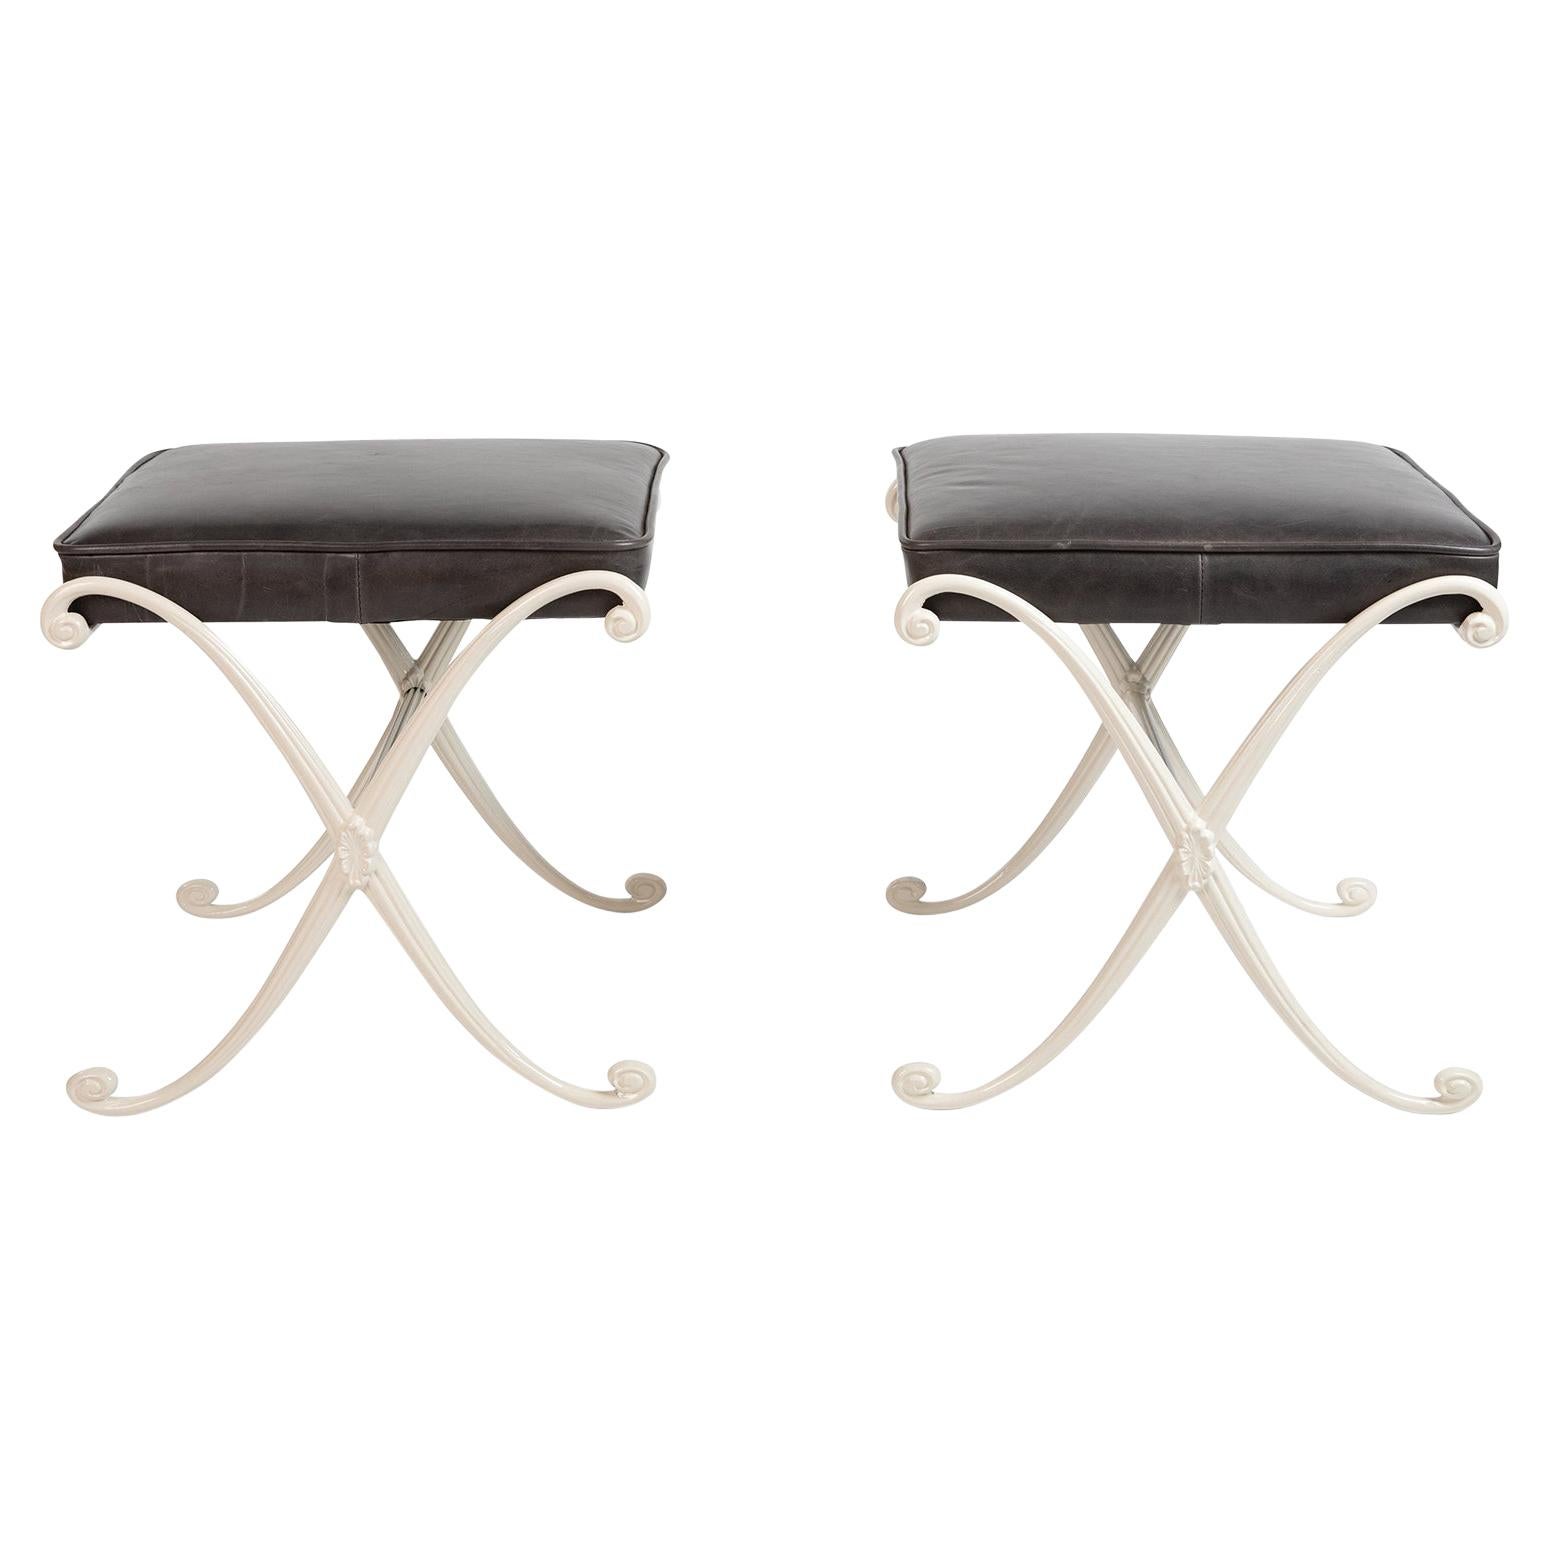 Thinline Charcoal Leather and Aluminum Ottomans